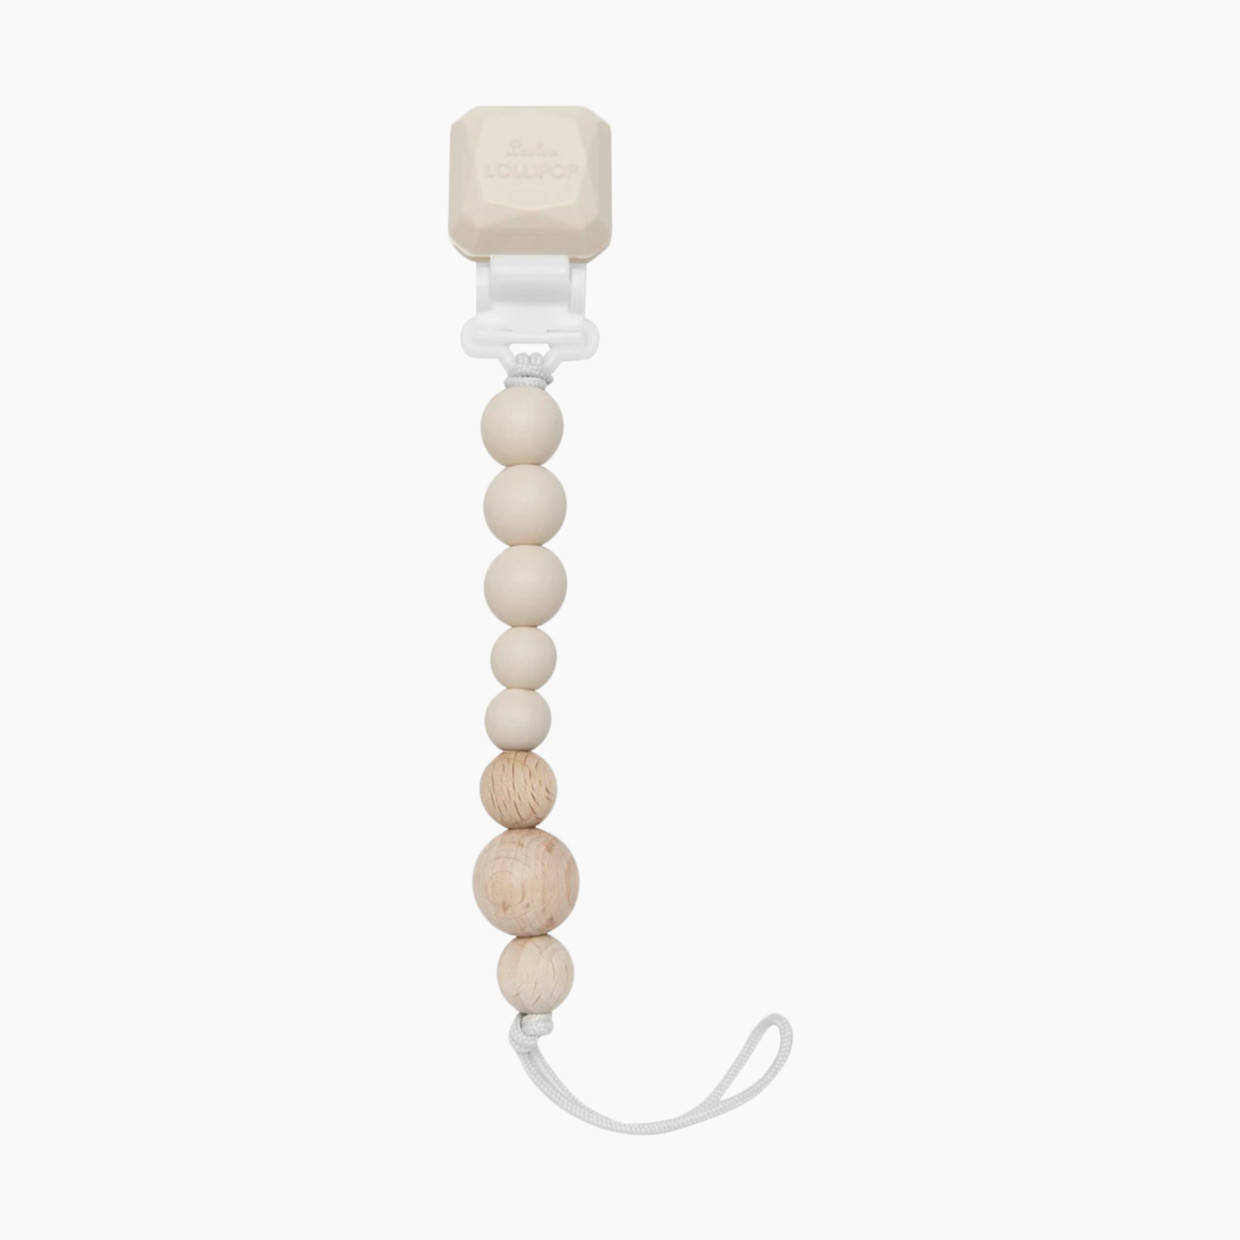 Loulou Lollipop Color Pop Silicone and Wood Pacifier Clip - Coconut Cream.